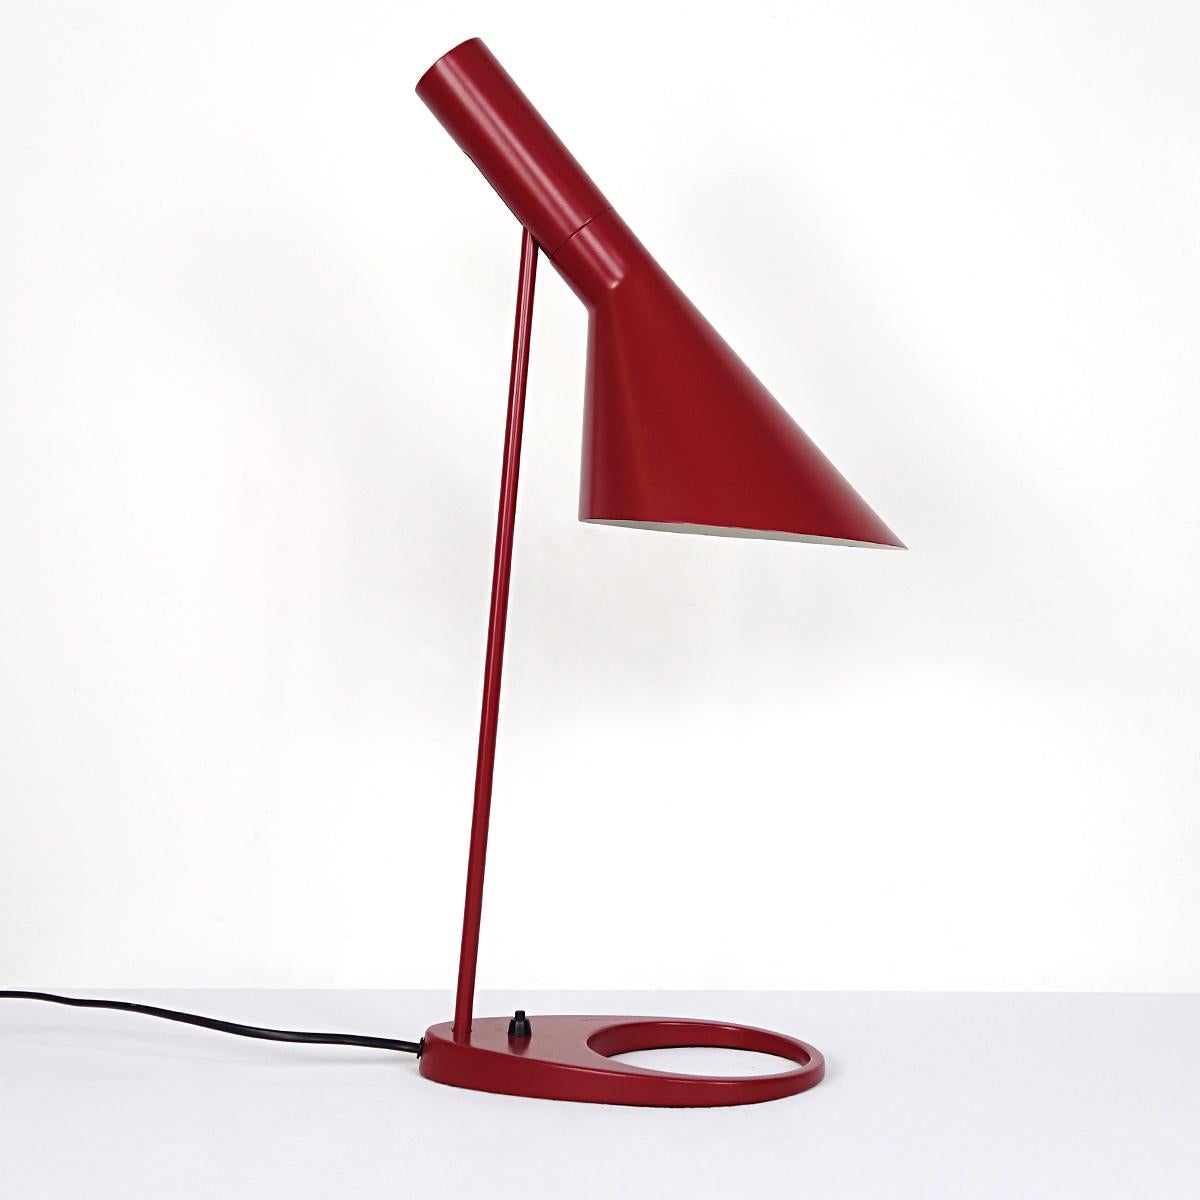 This table lamp was designed in 1957 but still looks as fresh as a summer breeze. It was called AJ, the initials of its designer Arne Jacobsen. 
It was made in Denmark by Louis Poulsen.
The lamp was designed, among other lighting fixtures, for the